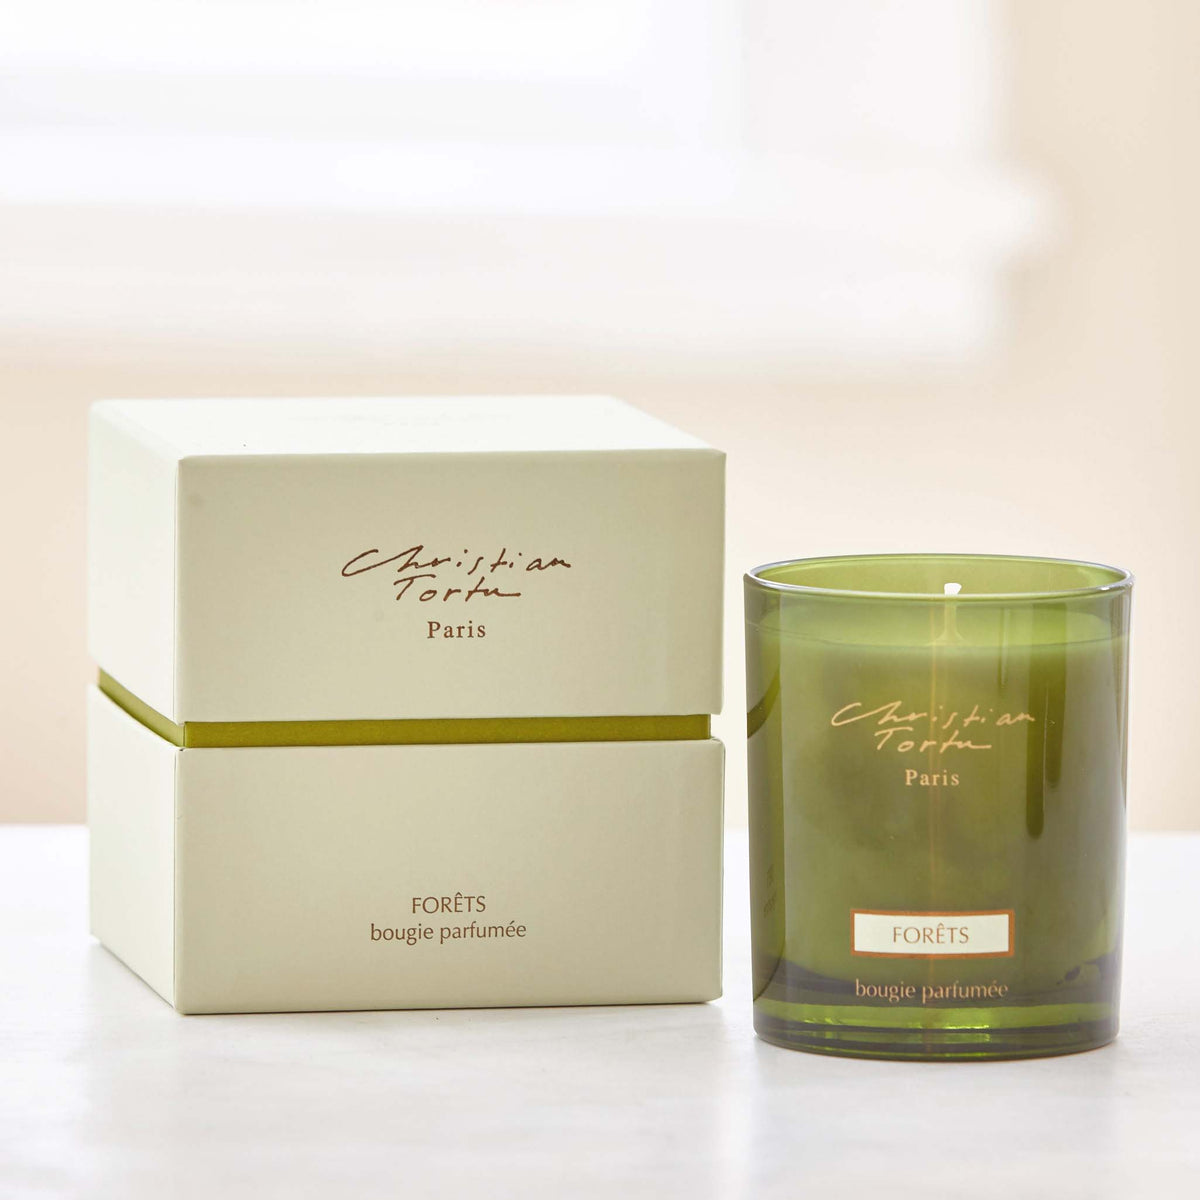 CHRISTIAN TORTU FORETS HOME FRAGRANCE COLLECTION